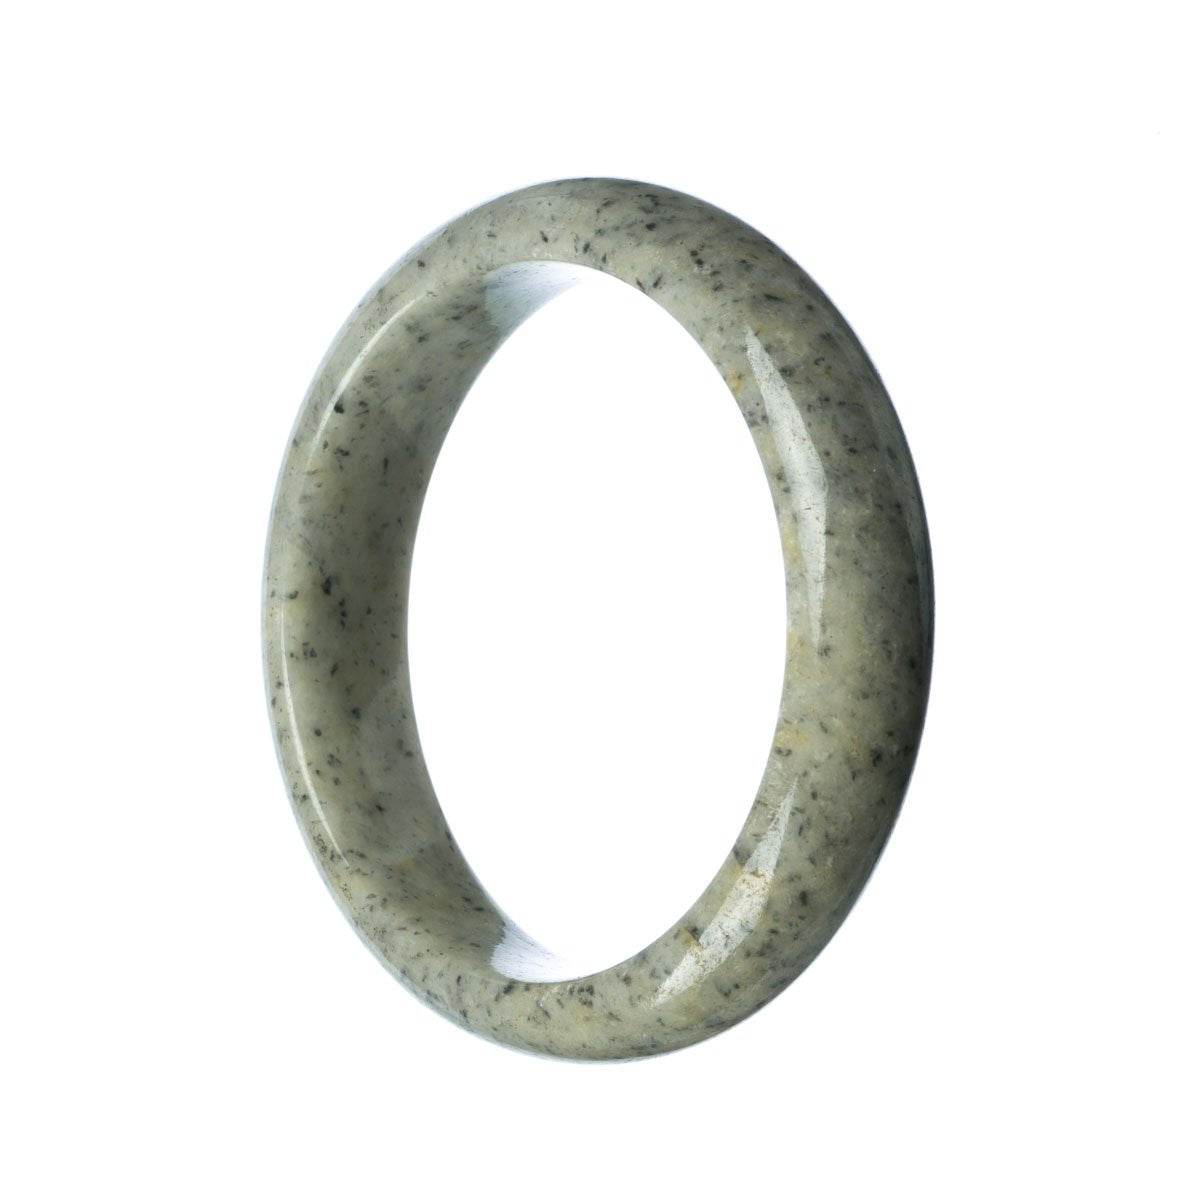 A close-up photo of a Real Grade A Grey Green Jadeite Jade Bangle, measuring 63mm in diameter. The bangle has a unique half-moon shape and is manufactured by MAYS.